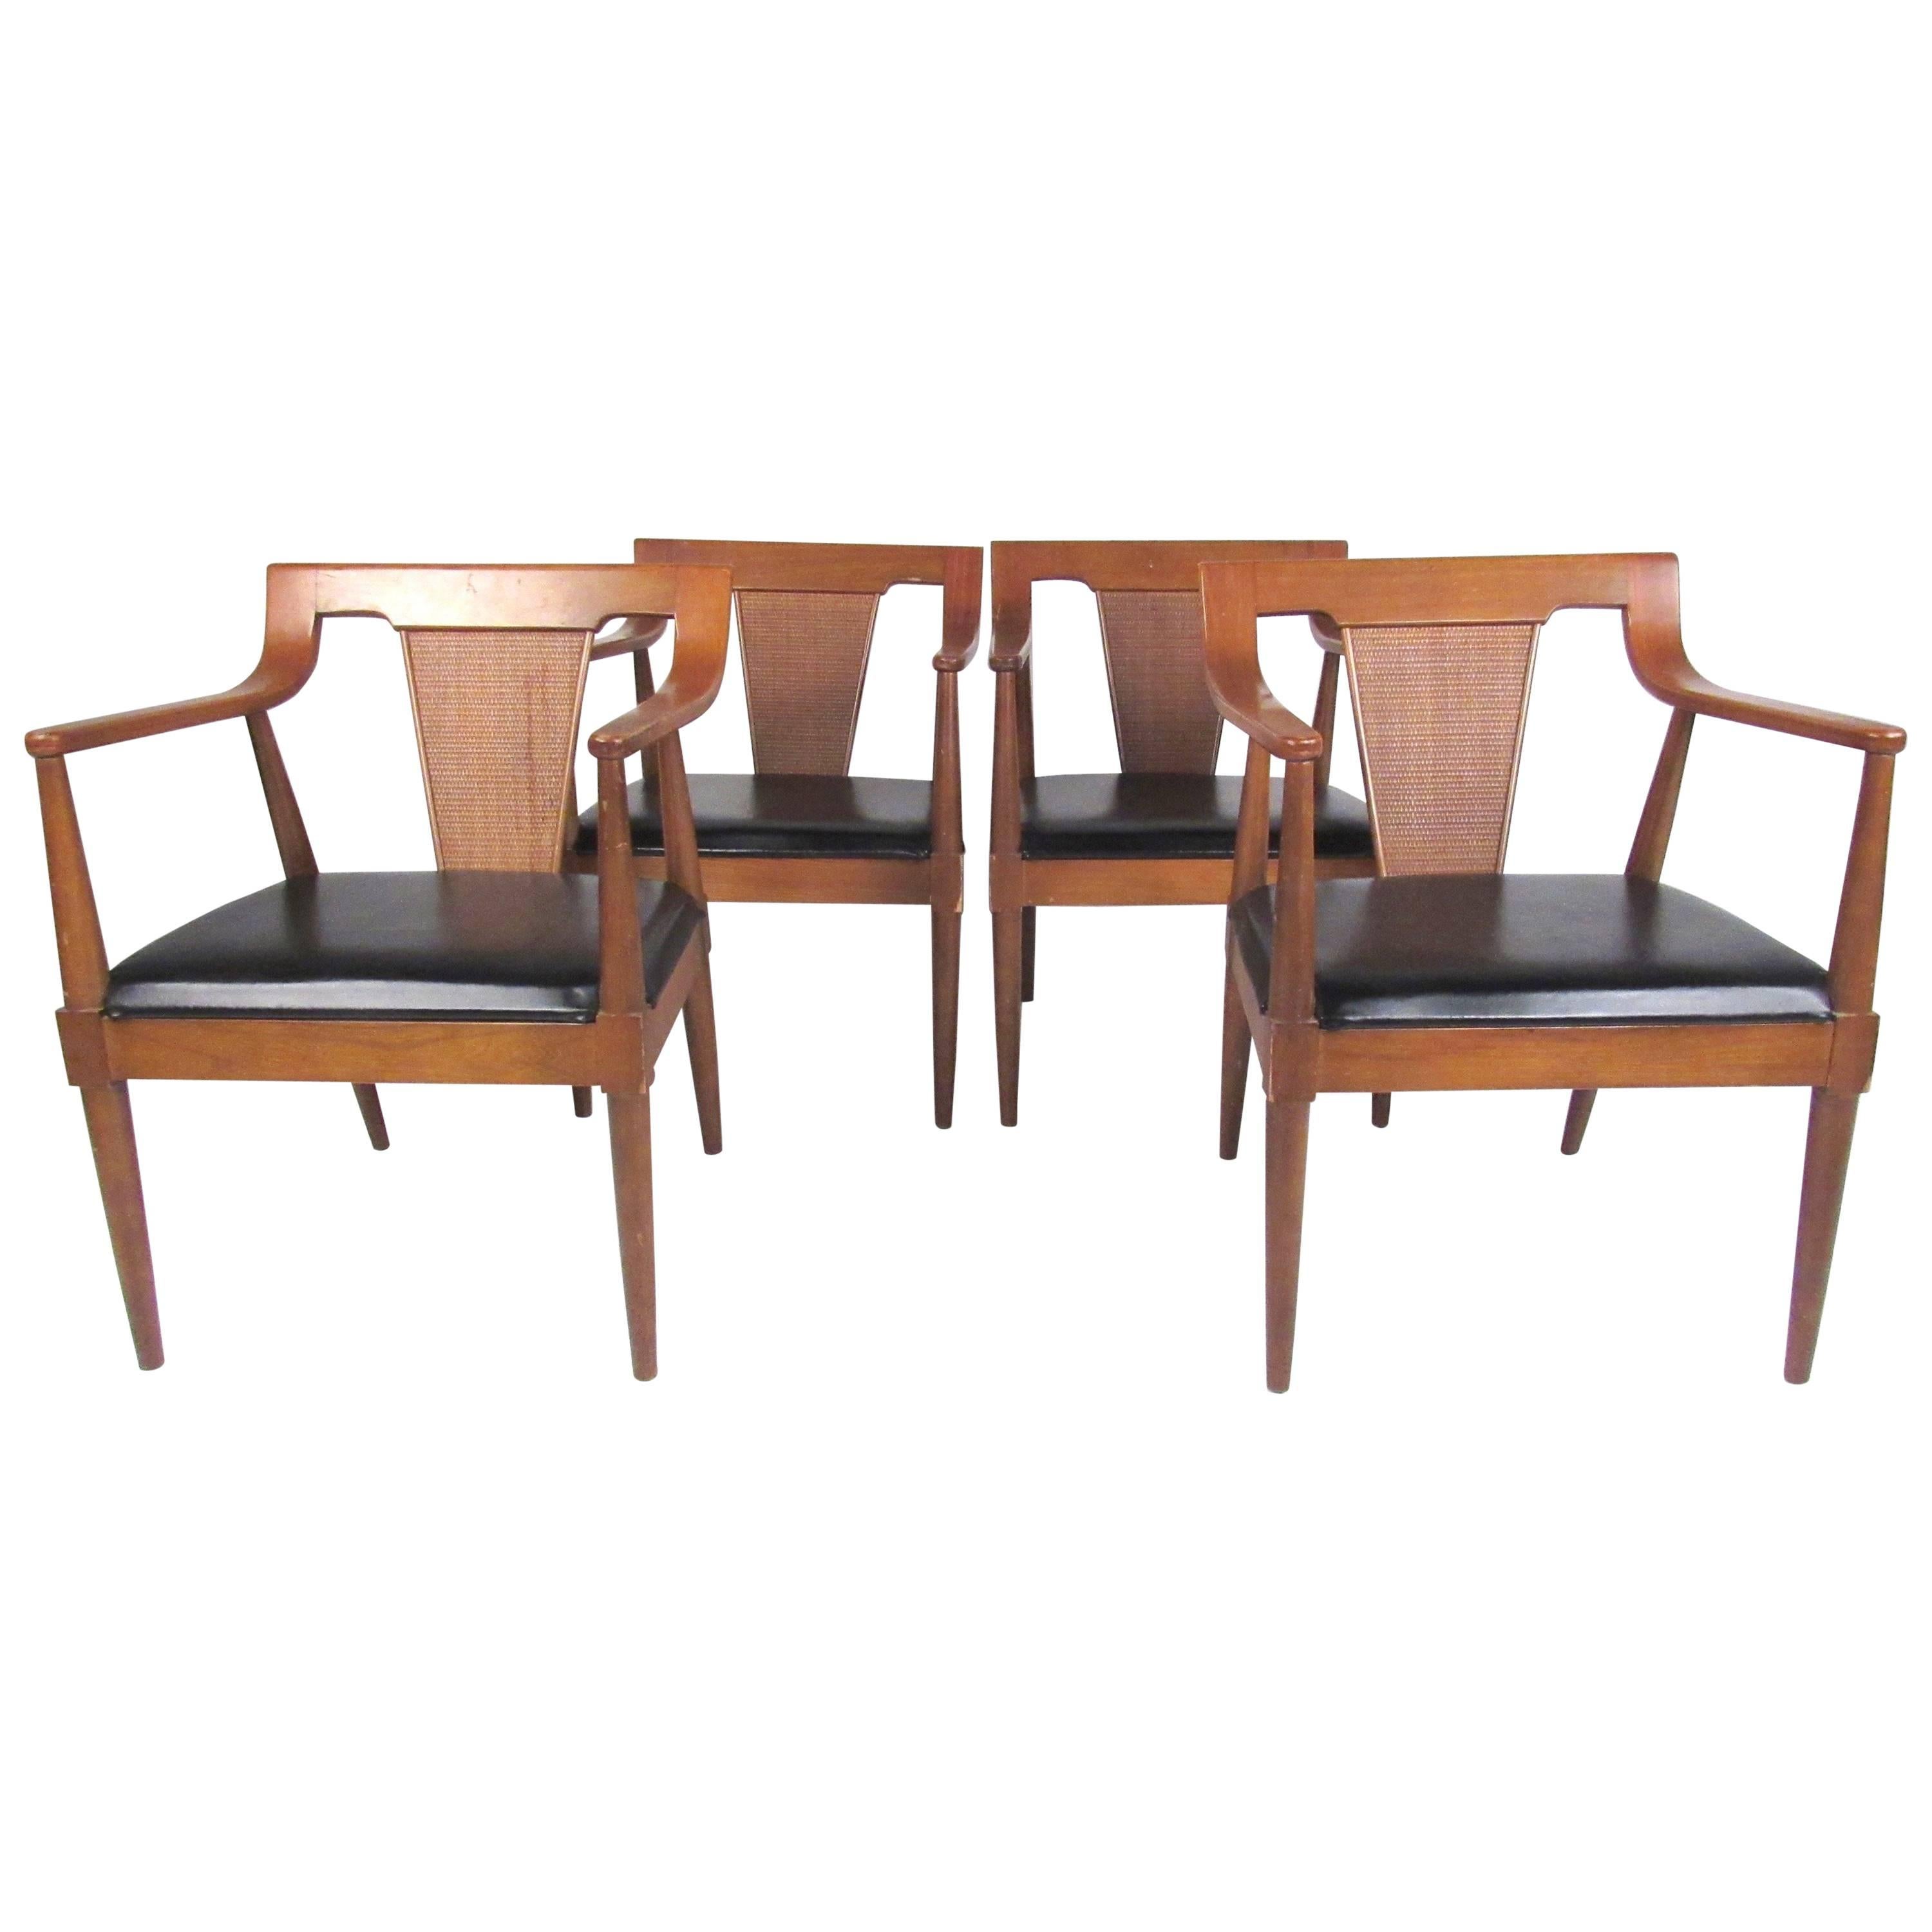 Stylish Set of American Modern Dining Chairs by Basic Witz